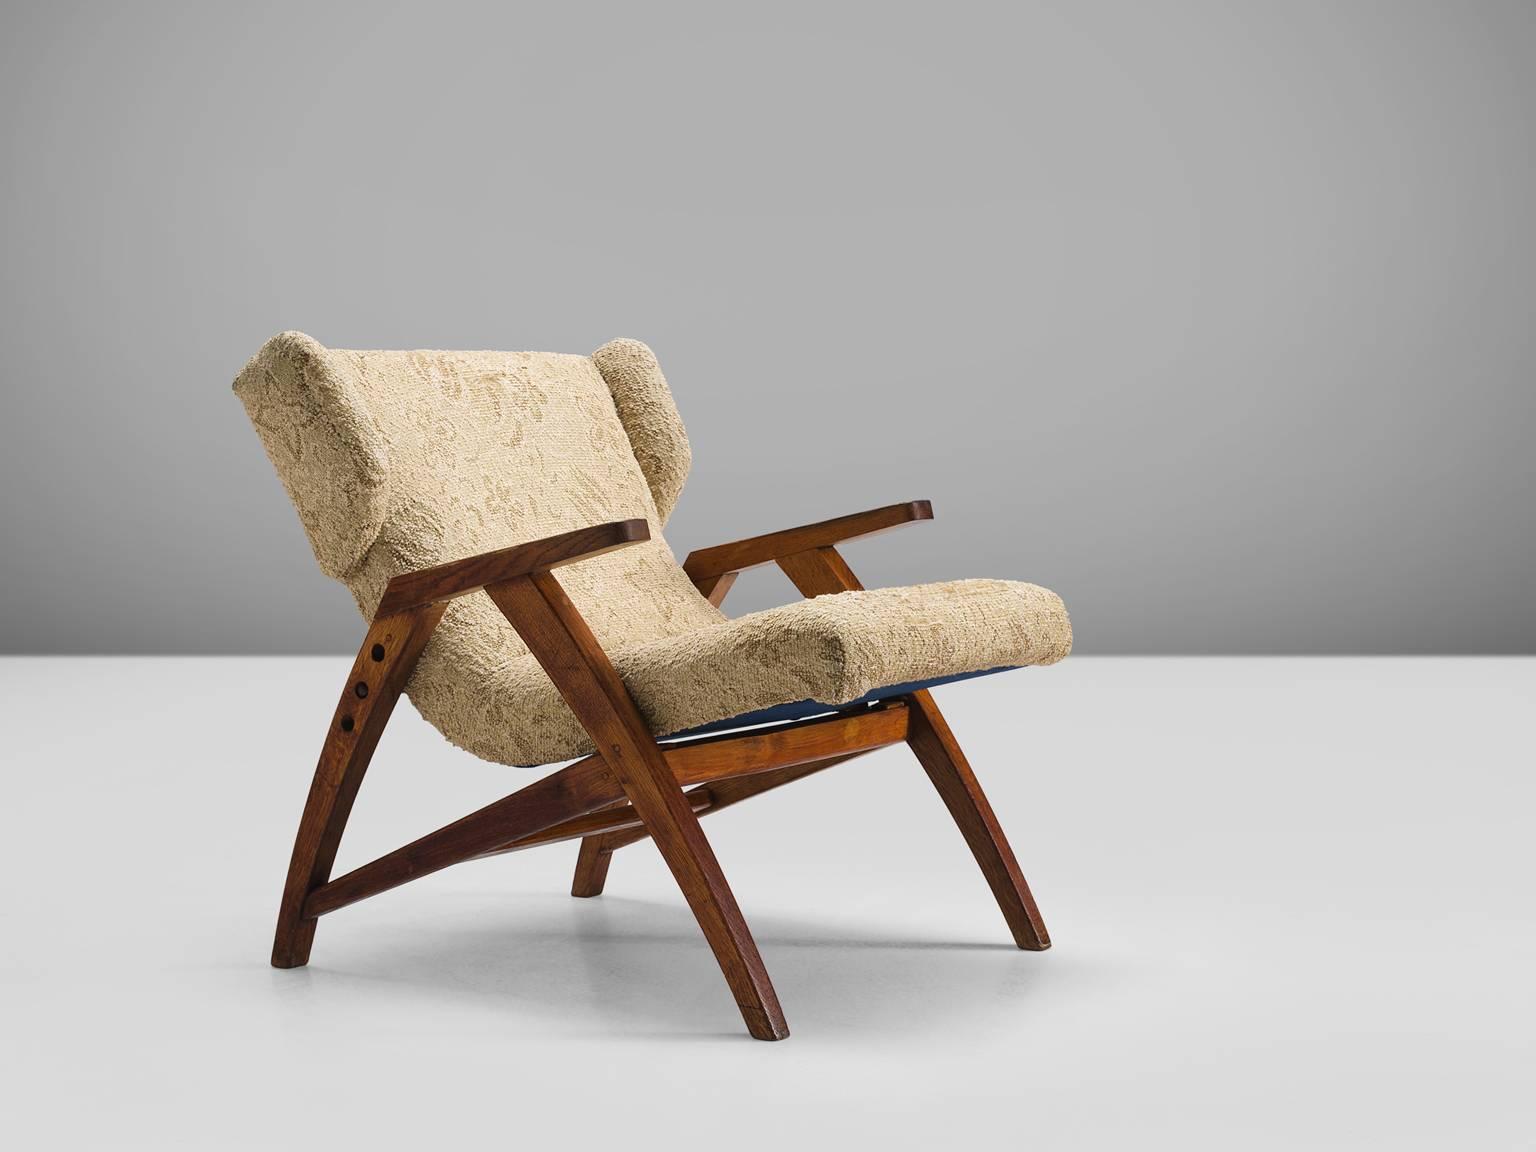 Easy chair, wood, beige brown fabric, oak, Czech Republic, 1940s.

This strong oak wingback chair is designed with a slightly sloped back in order to provide sitting comfort. The chair features small, geometric wings that are seperated from the the